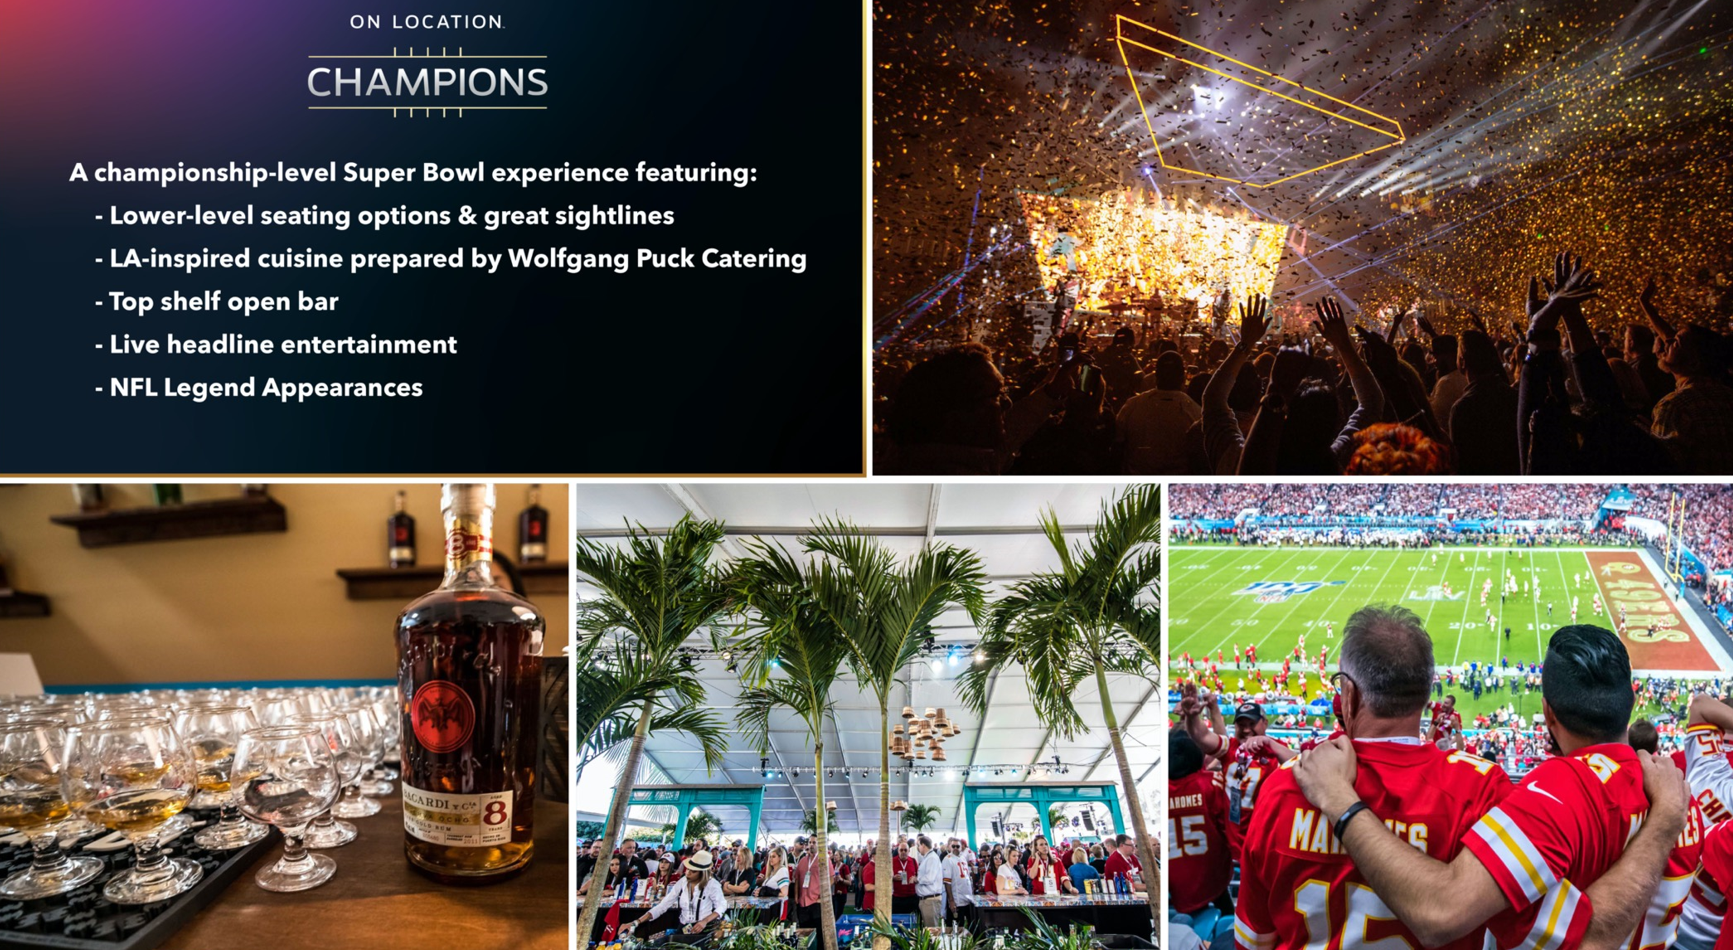 Super Bowl Ticket Package Opportunity